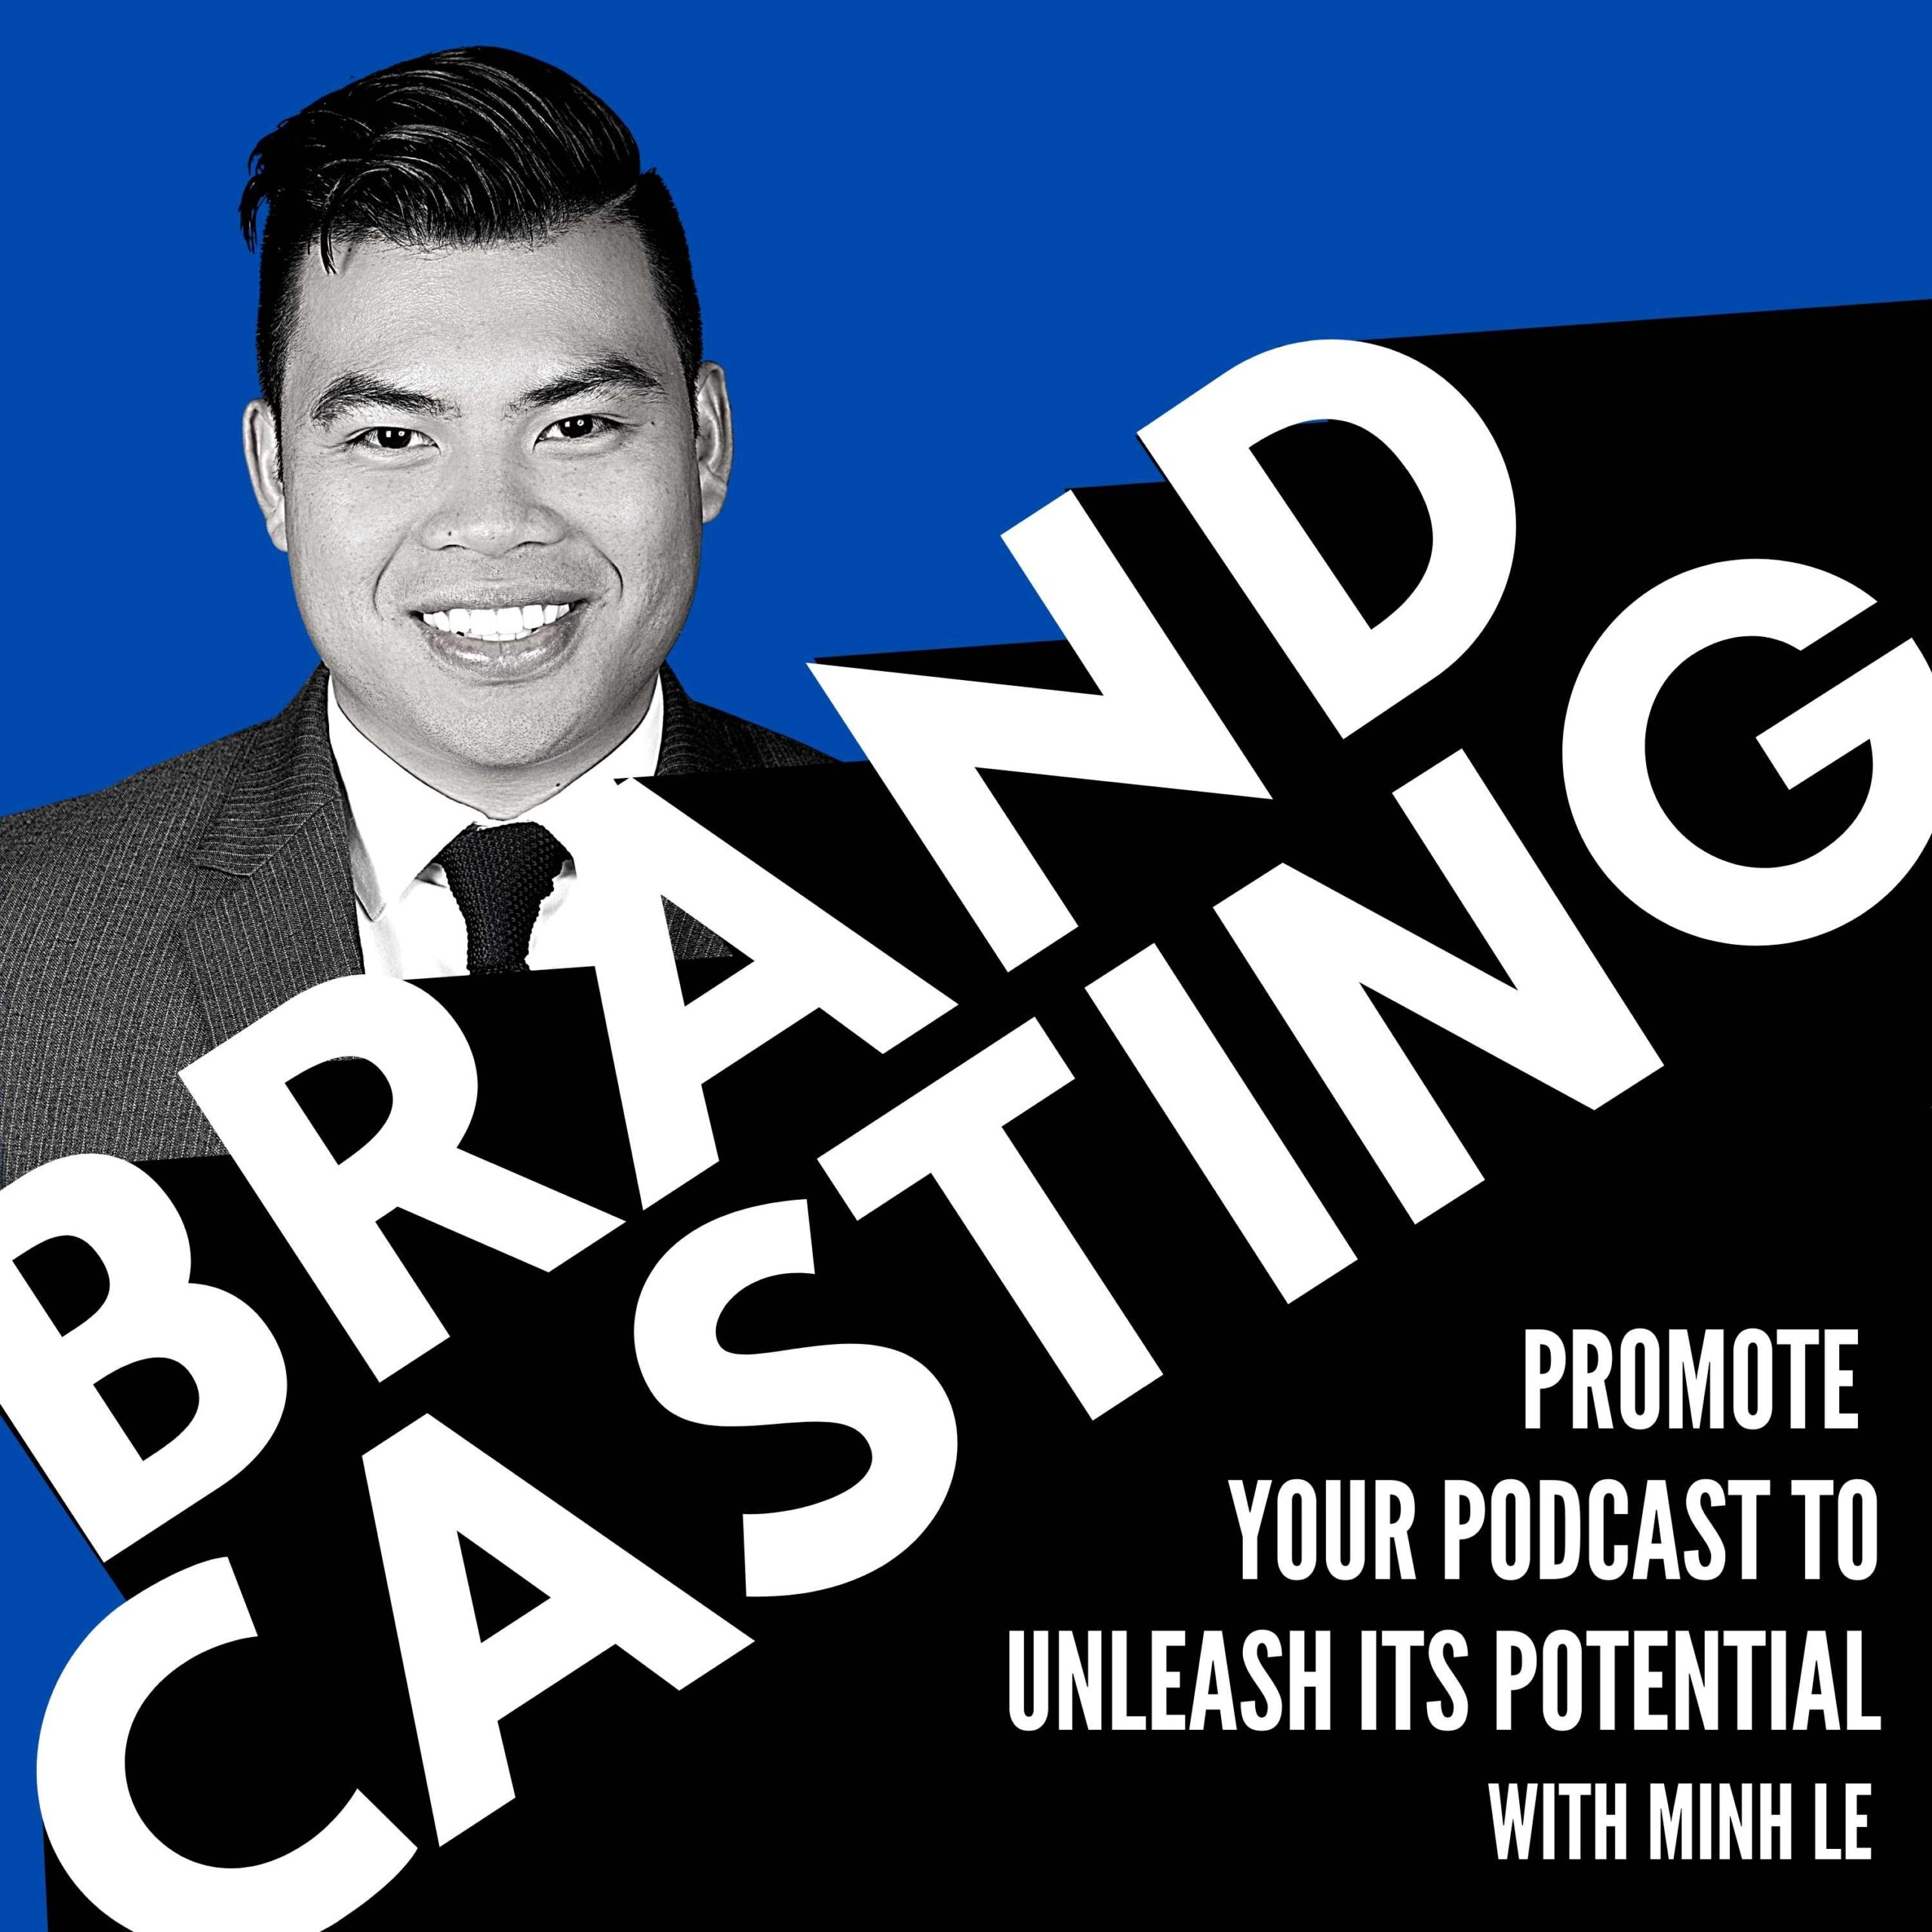 Promote Your Podcast to Unleash Its Potential with Minh Le